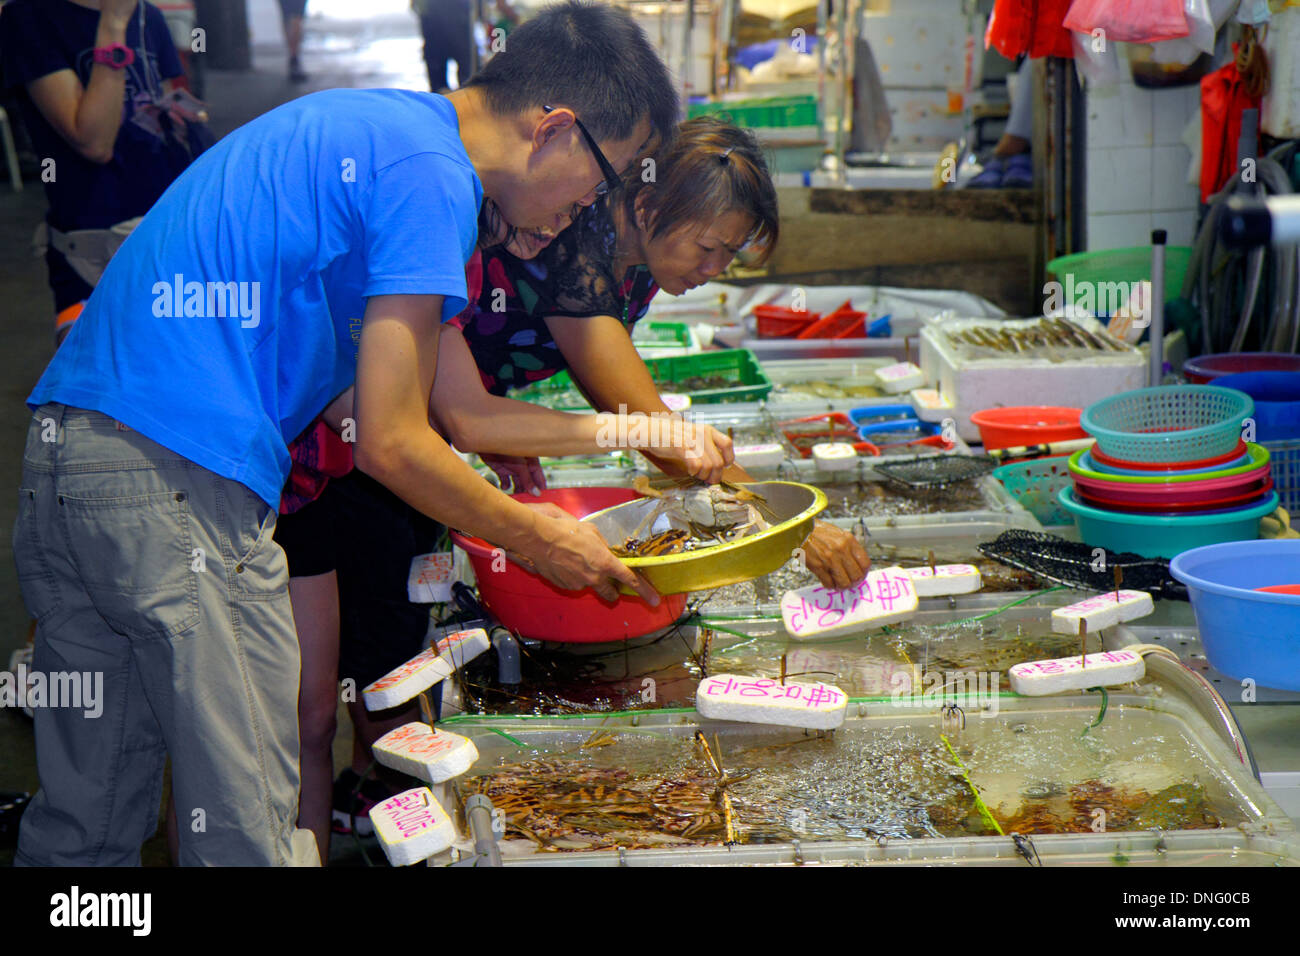 Hong Kong China,HK,Asia,Chinese,Oriental,Island,North Point,Java Road,North Point Ferry Pier,fish,vendor vendors stall stalls booth market marketplace Stock Photo